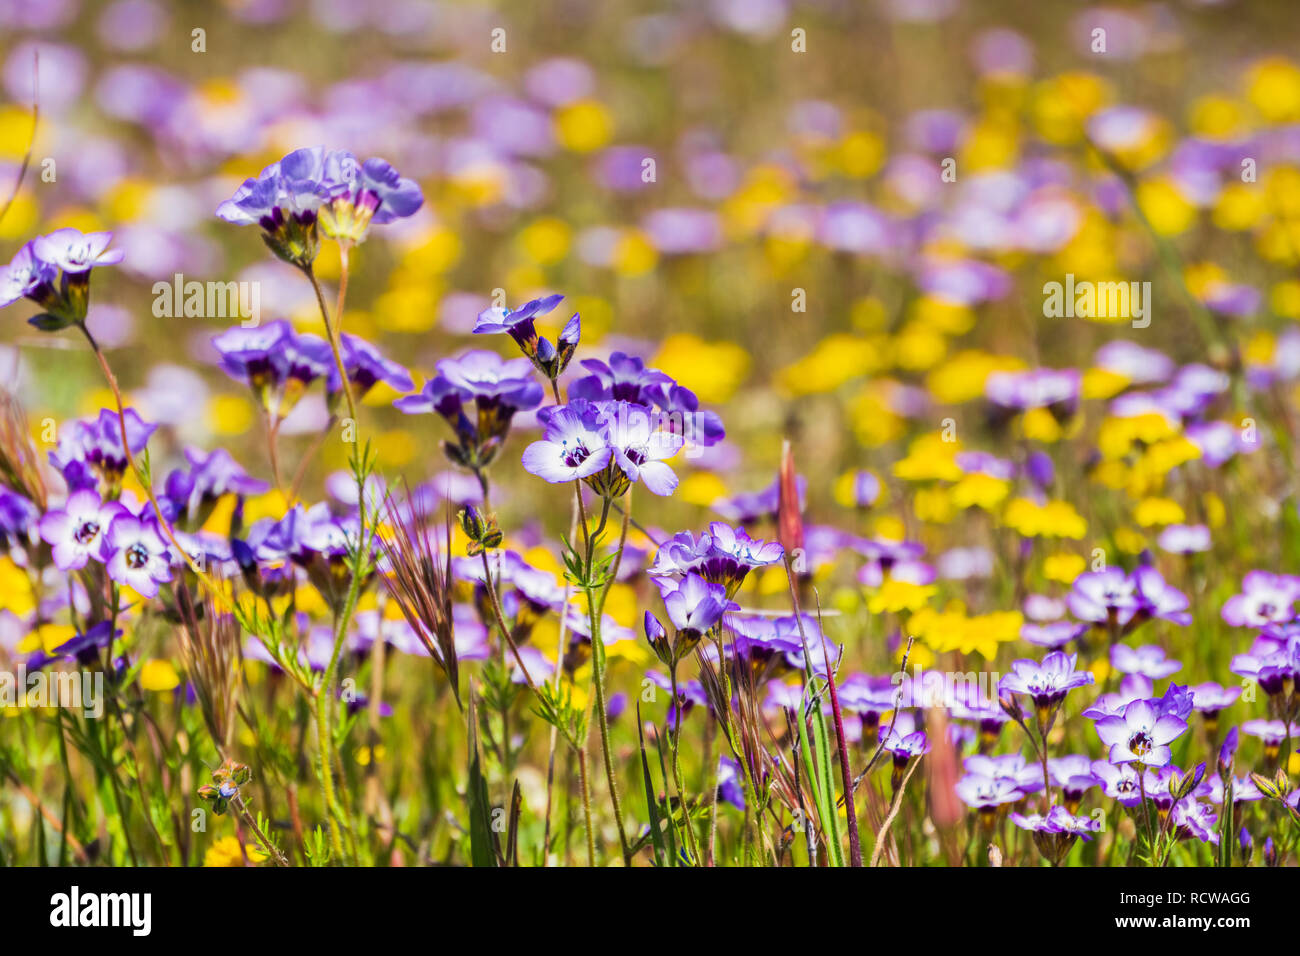 Goldfields and Gilia wildflowers blooming on a meadow, Henry W. Coe State Park, California Stock Photo